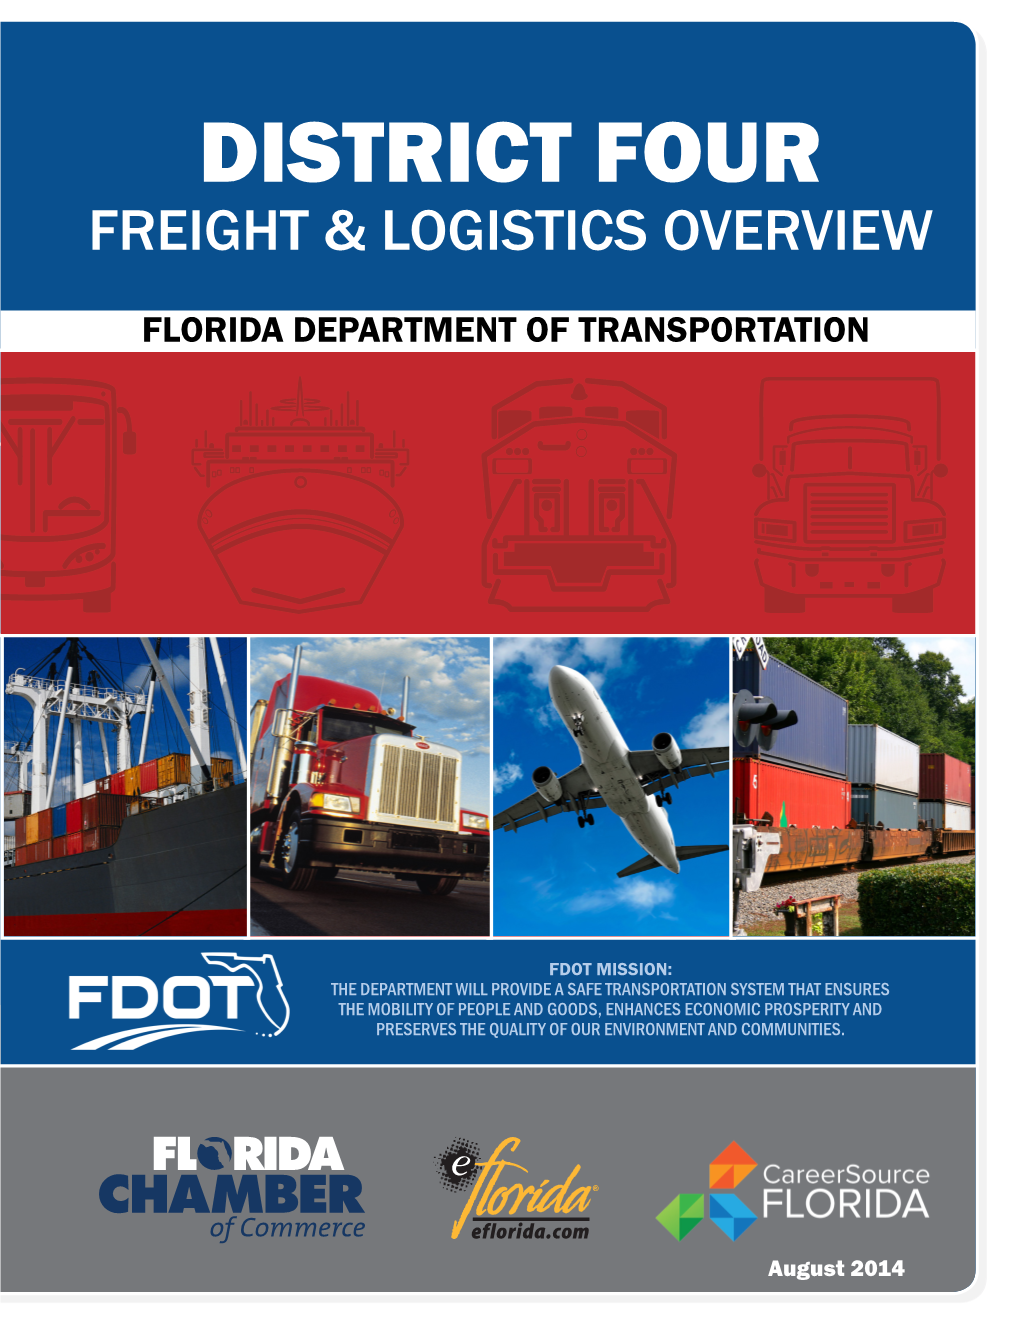 District Four Freight & Logistics Overview